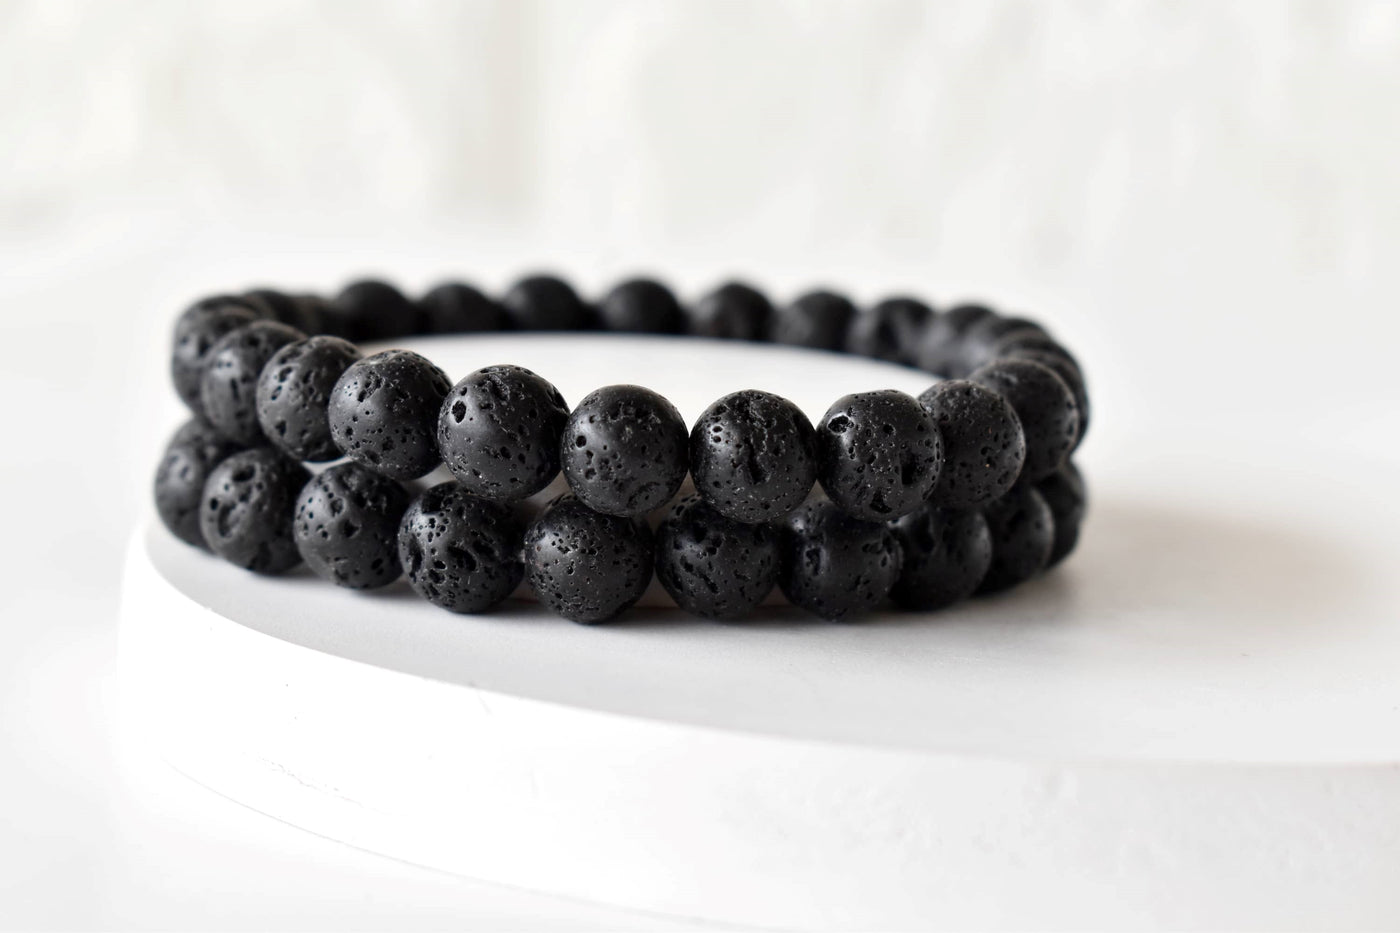 Lava Bracelet (Protection and Stress Relief)